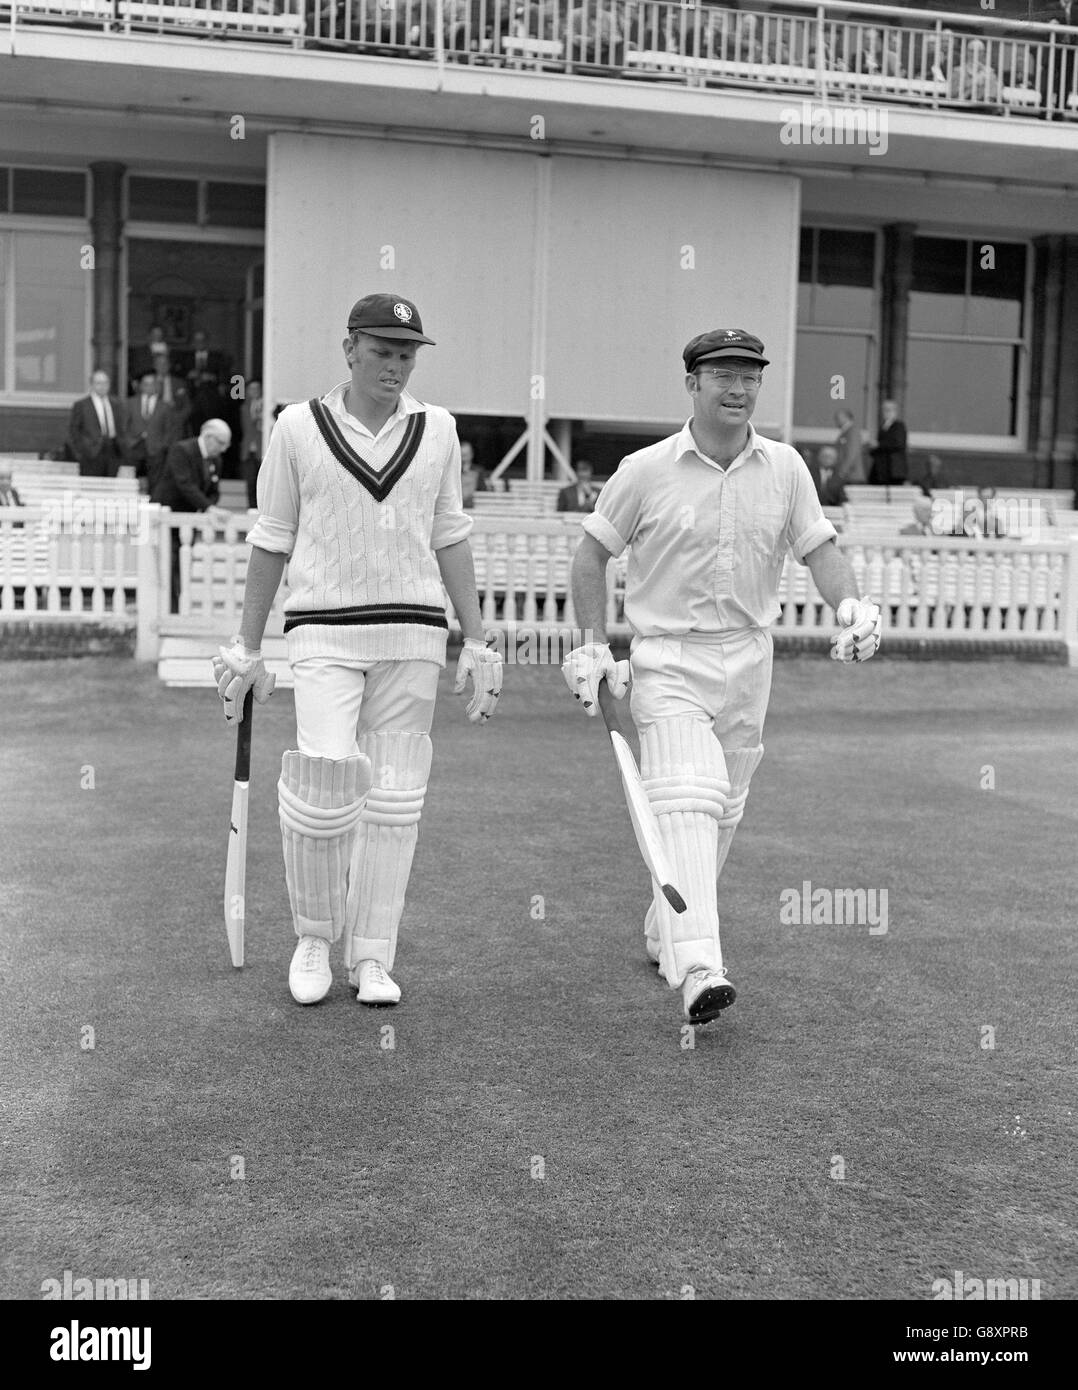 Barry Richards (l) and Eddie Barlow (r) make their to the crease to start batting for the Rest of the World XI side Stock Photo